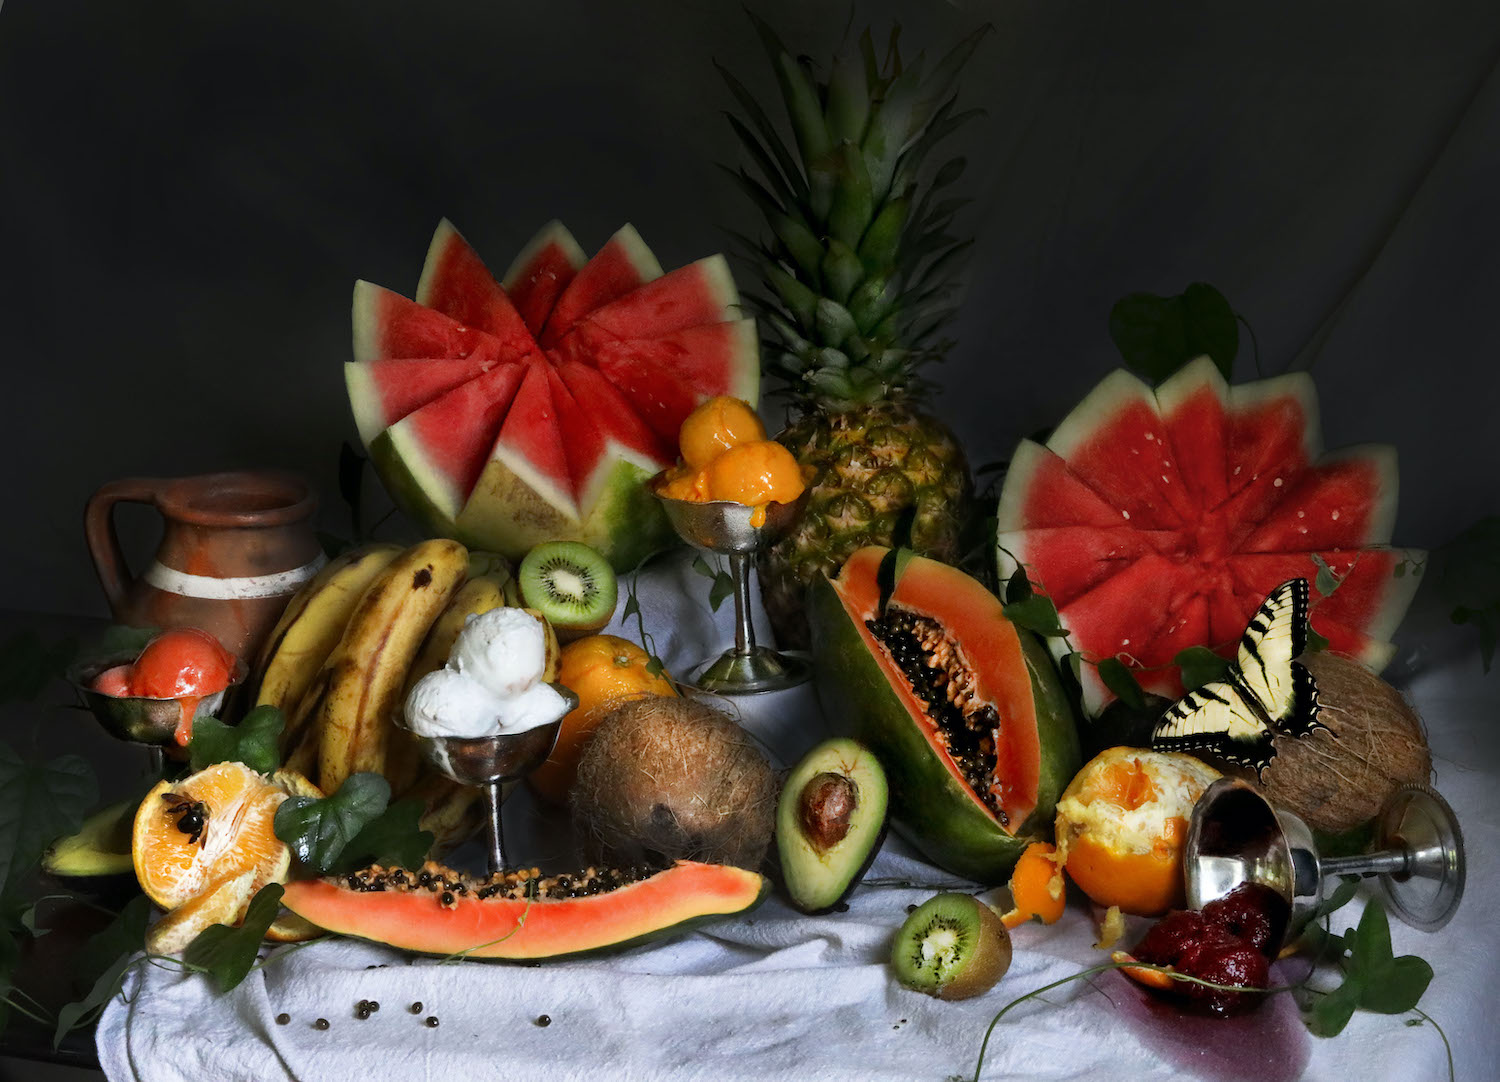 Table display of an assortment of colorful foods including watermelon, avocado, papaya, kiwi, ice cream and more